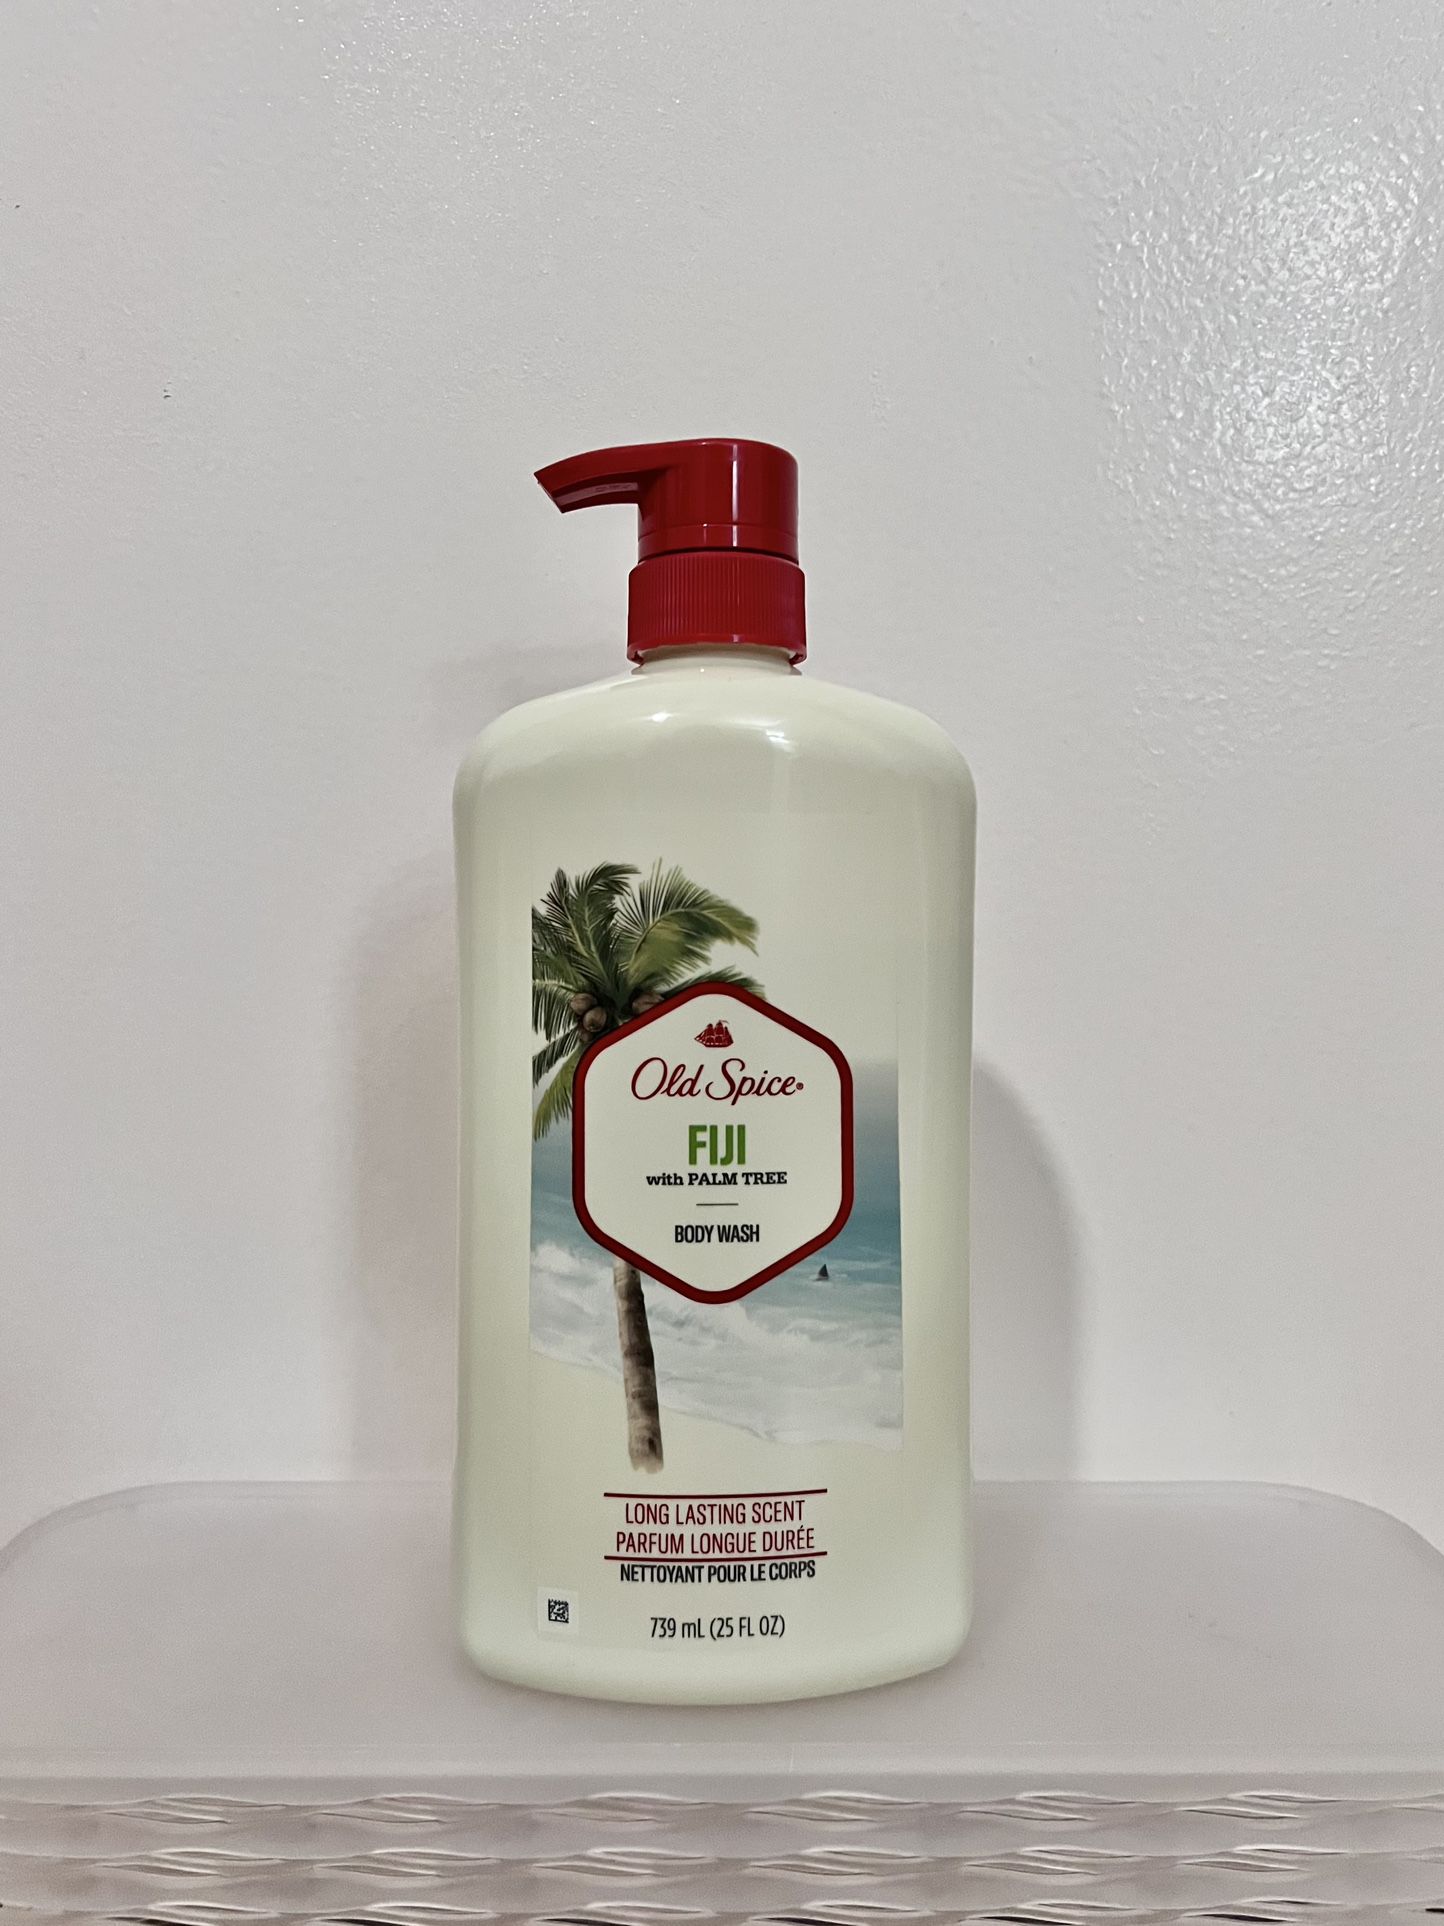 Old Spice Body Wash $5